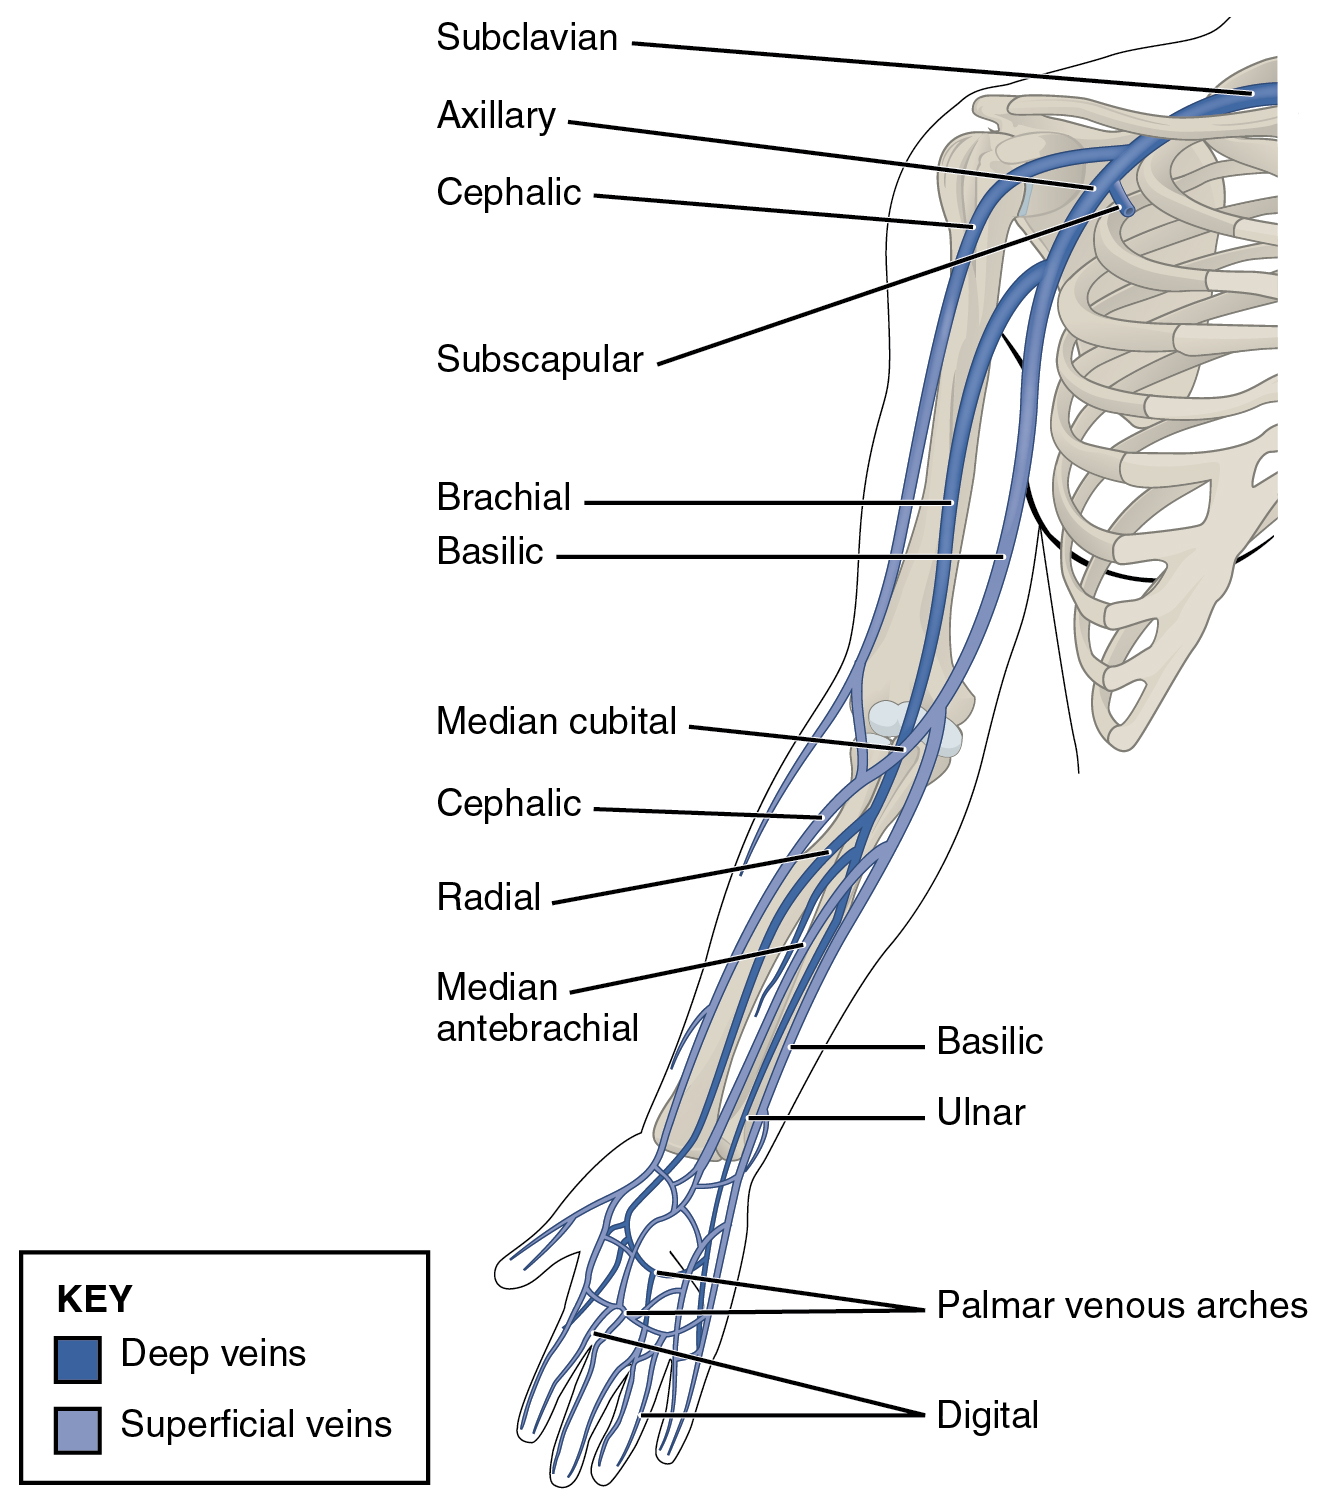 This diagram shows the veins present in the upper limb.